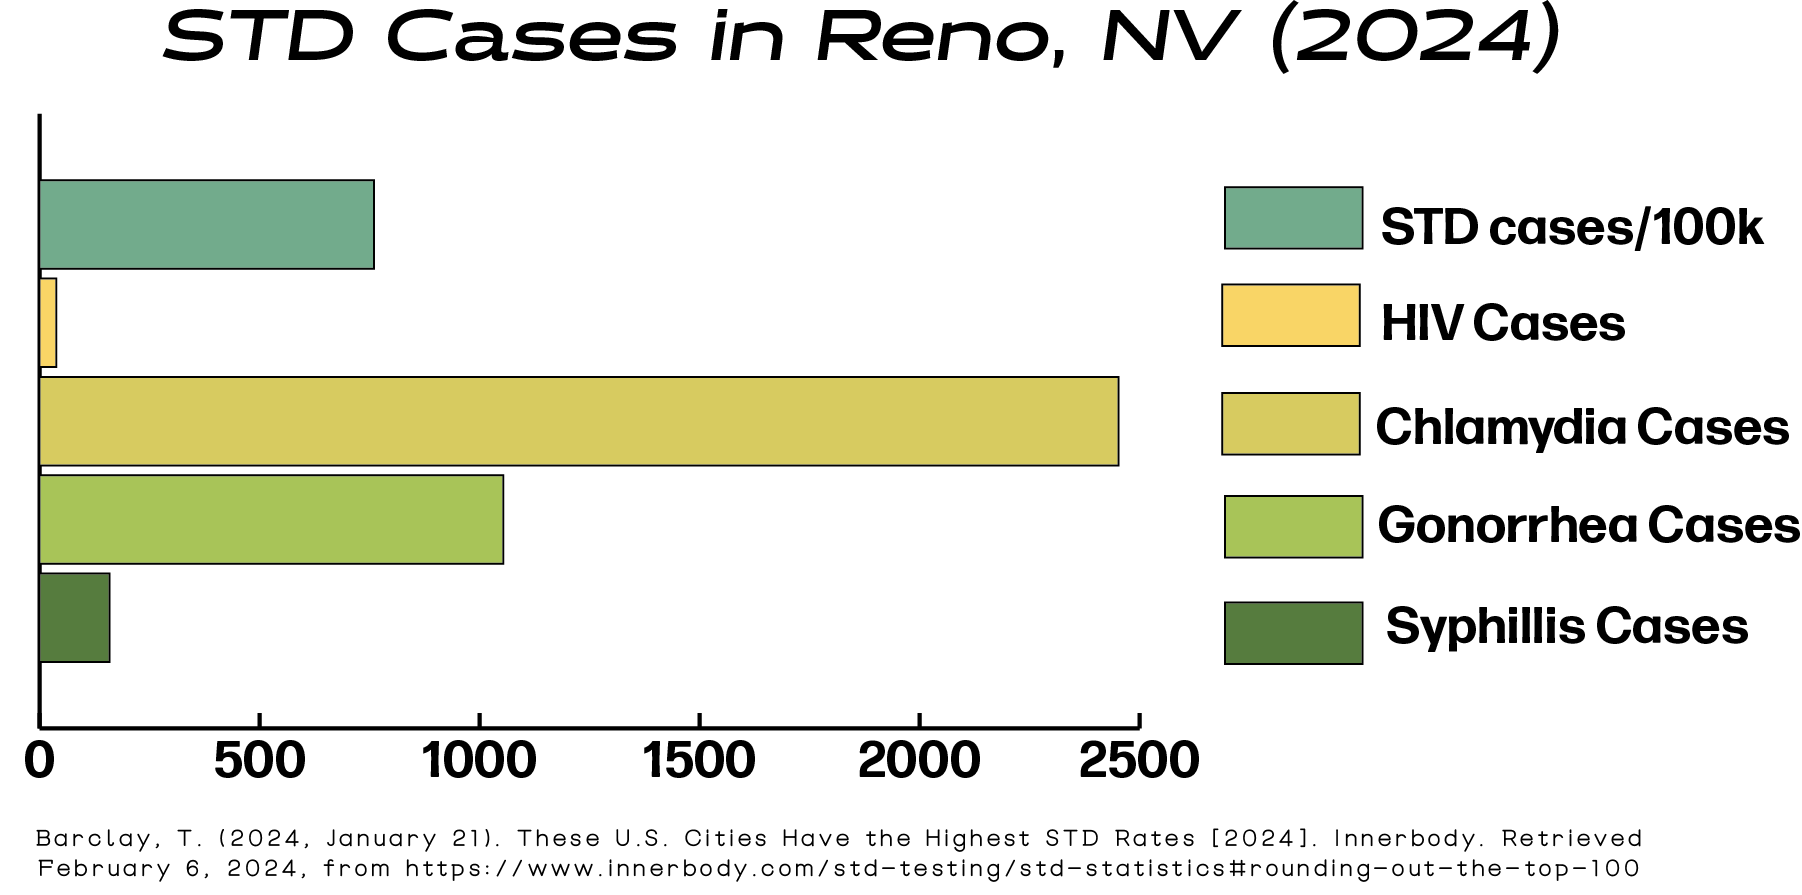 Reno ranked 69th in cities with highest STD rates in the country